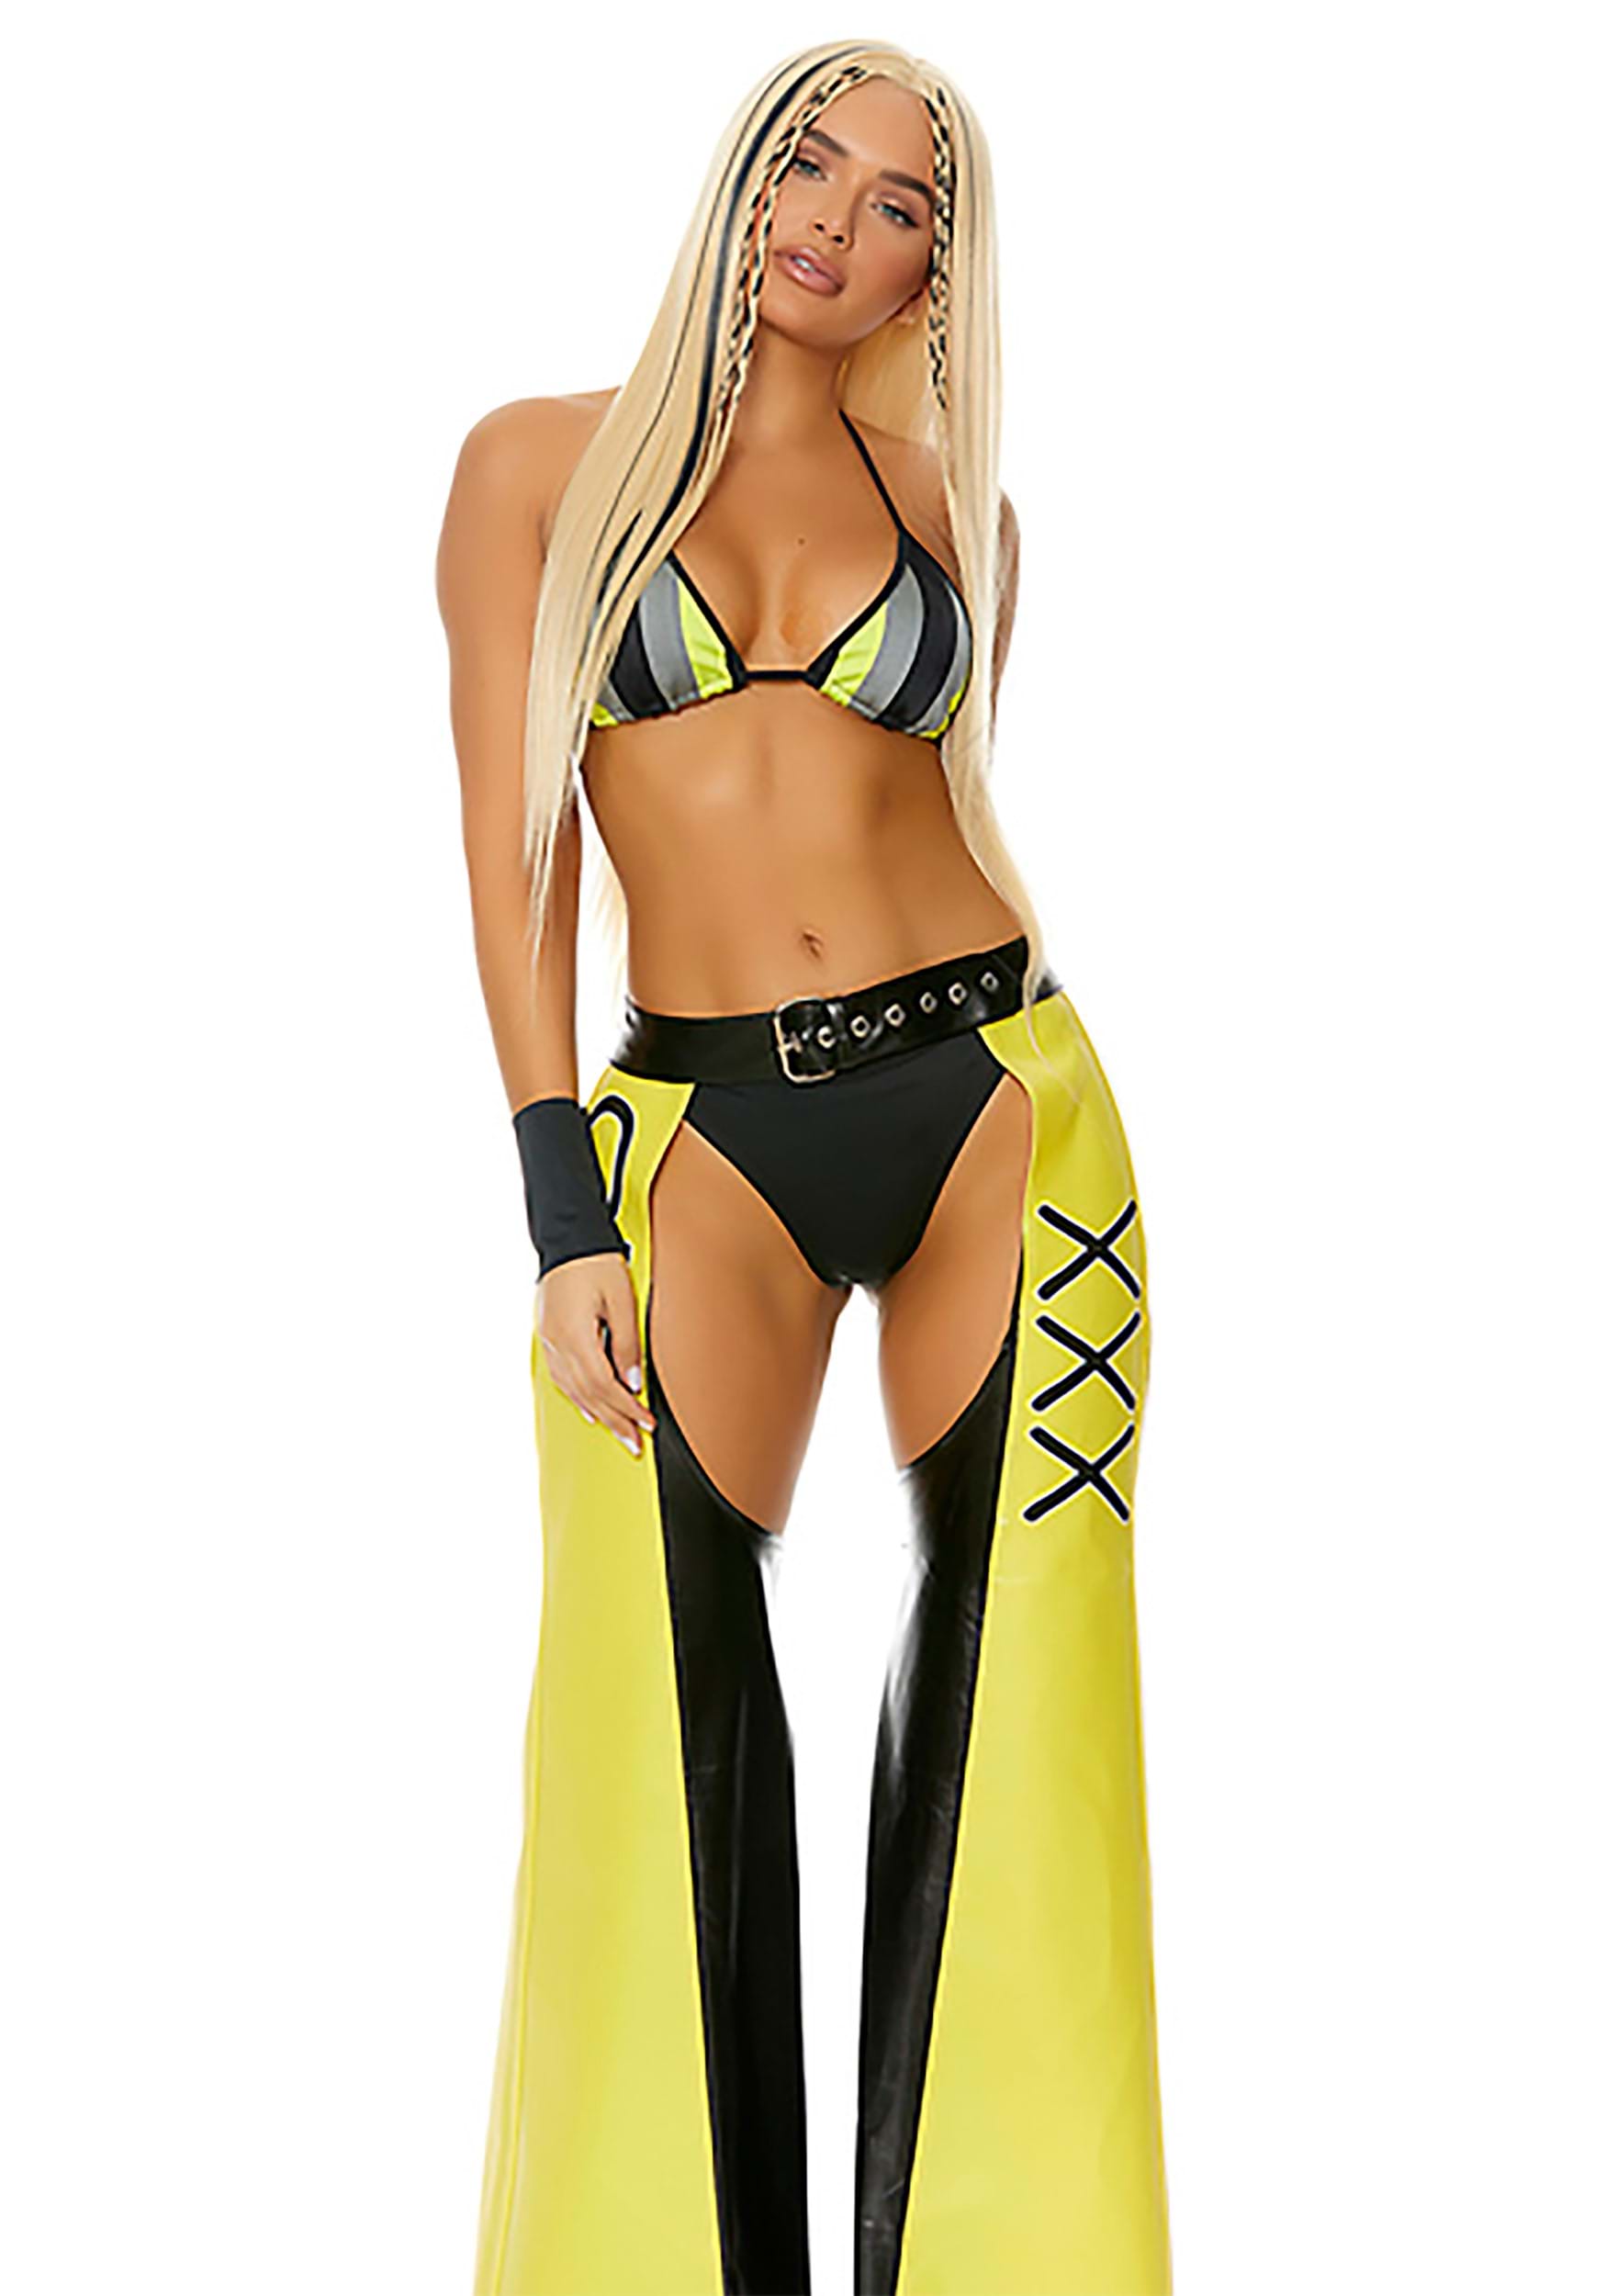 Women’s Filthy Sexy Iconic Superstar Costume